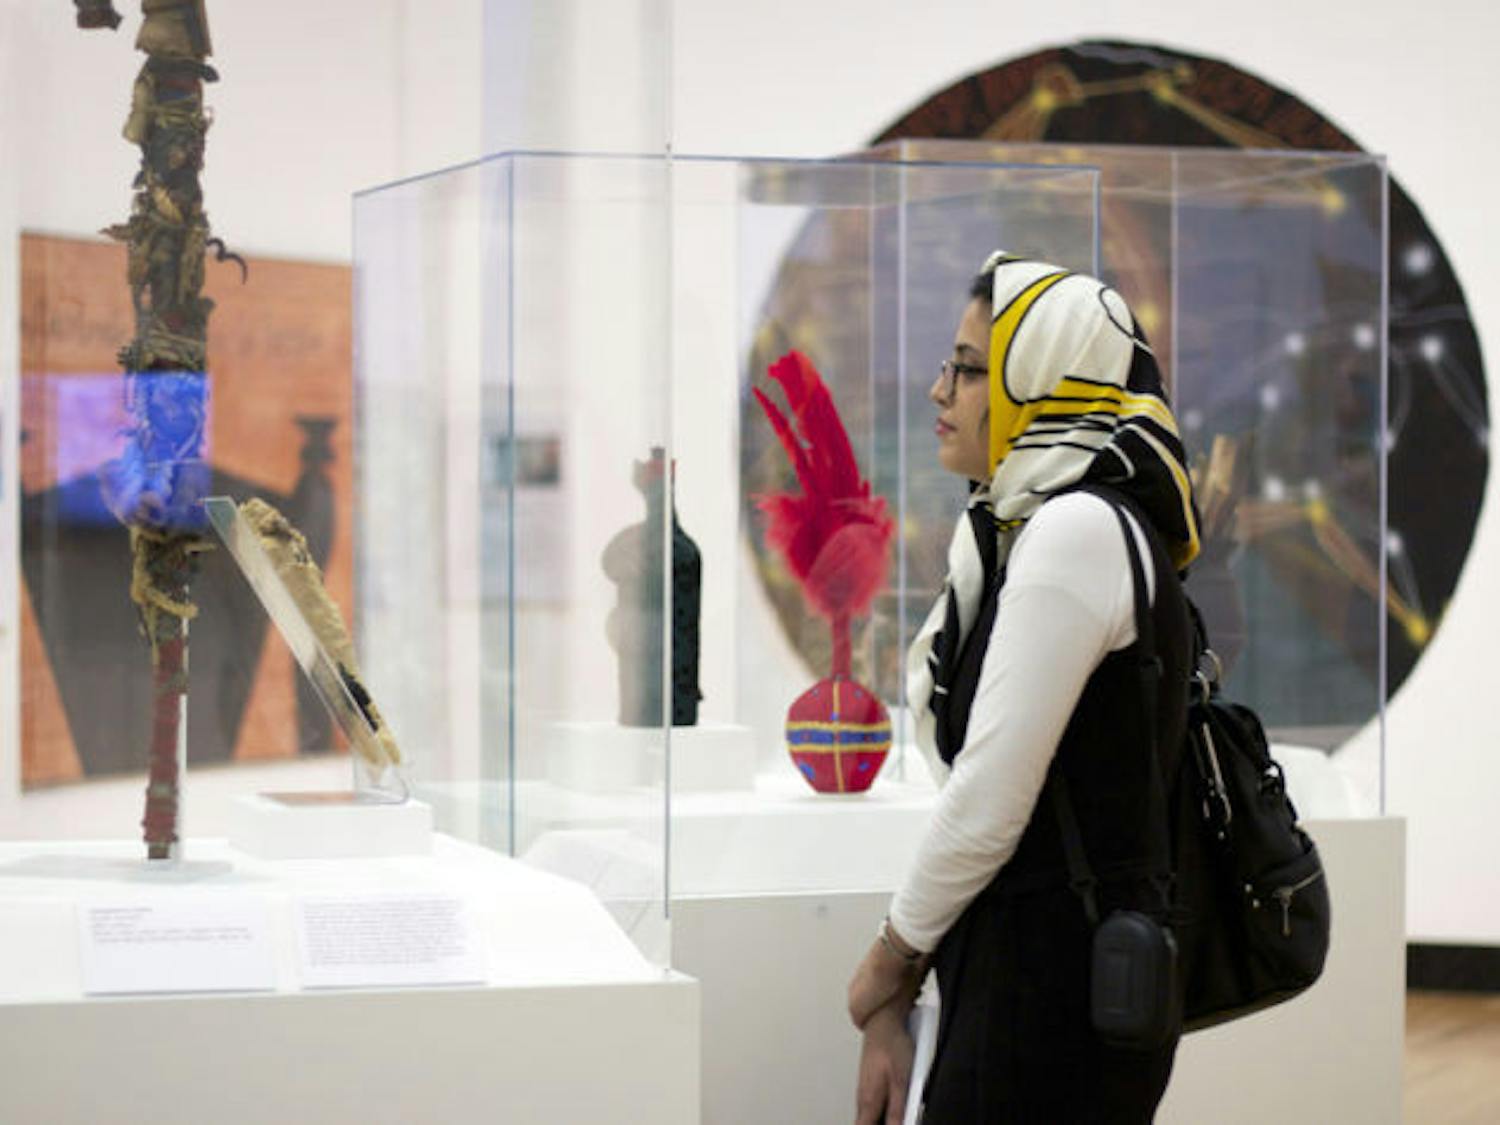 Faezeh Behzadnejad, 28, of New Jersey, browses “Kongo Across the Waters” Thursday at the Samuel P. Harn Museum of Art. The exhibit features archaeological discoveries and contemporary art.